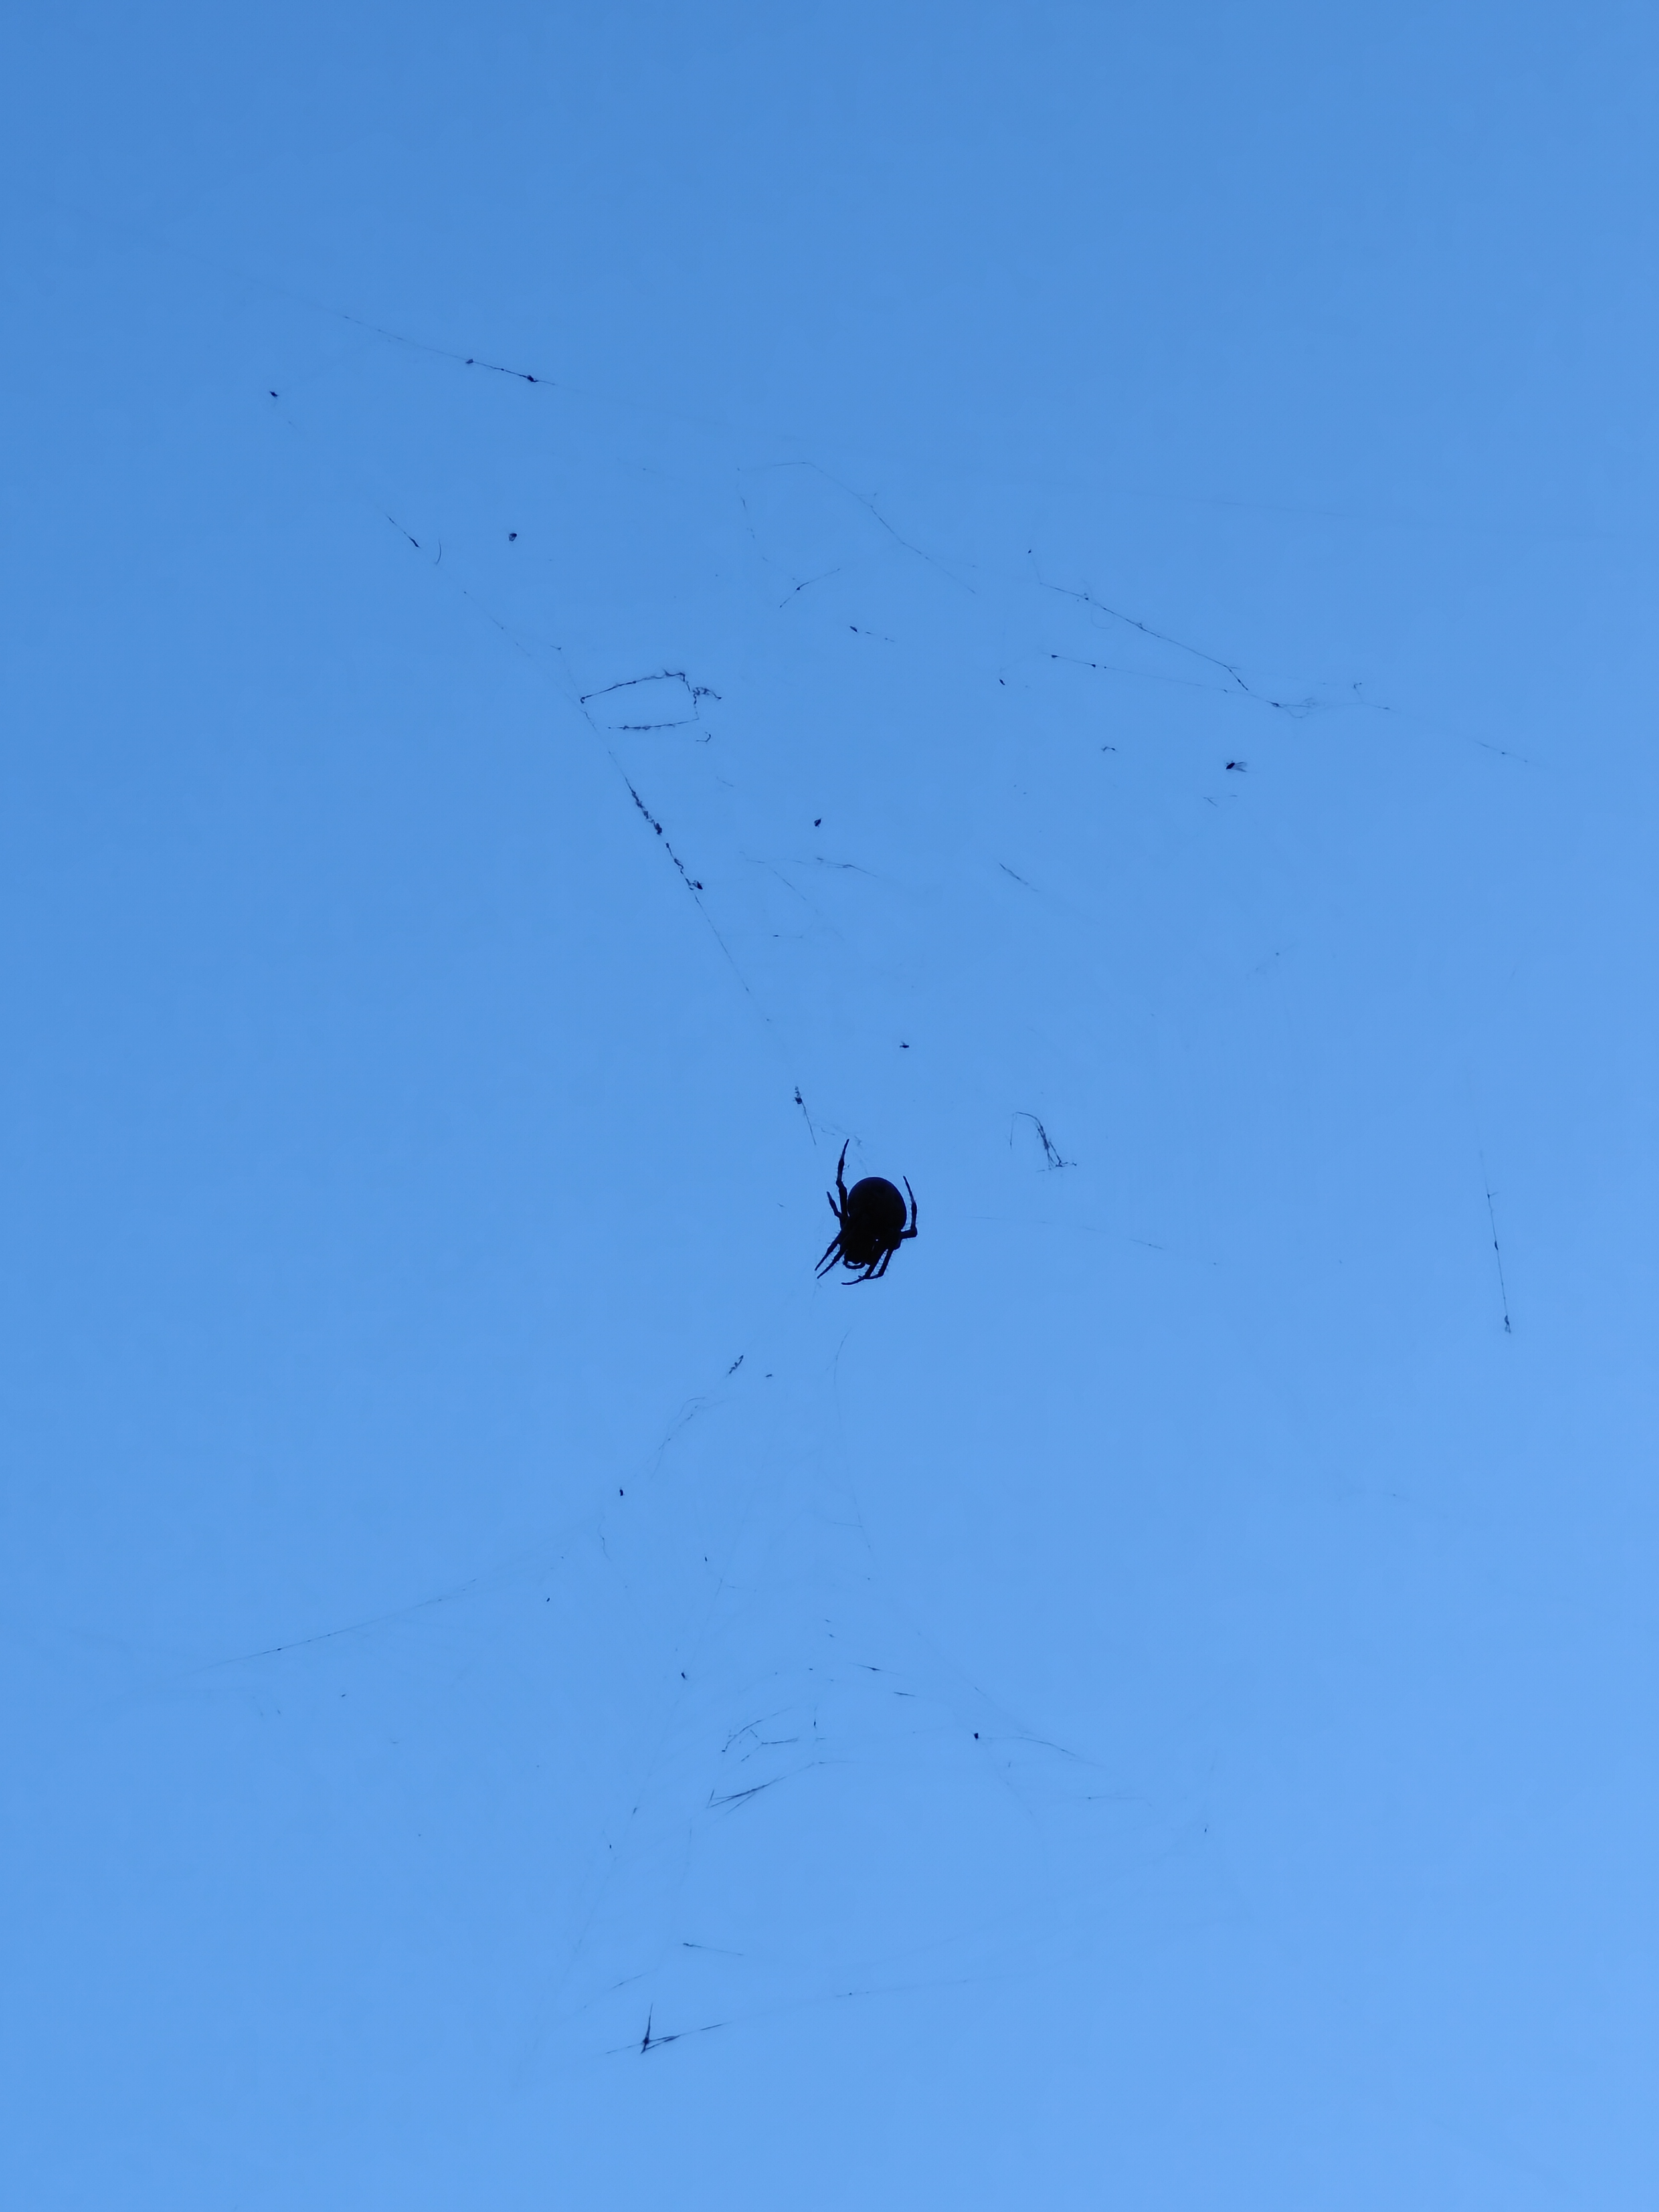 Spider in a web 3x optical zoom taken on OnePlus Open.